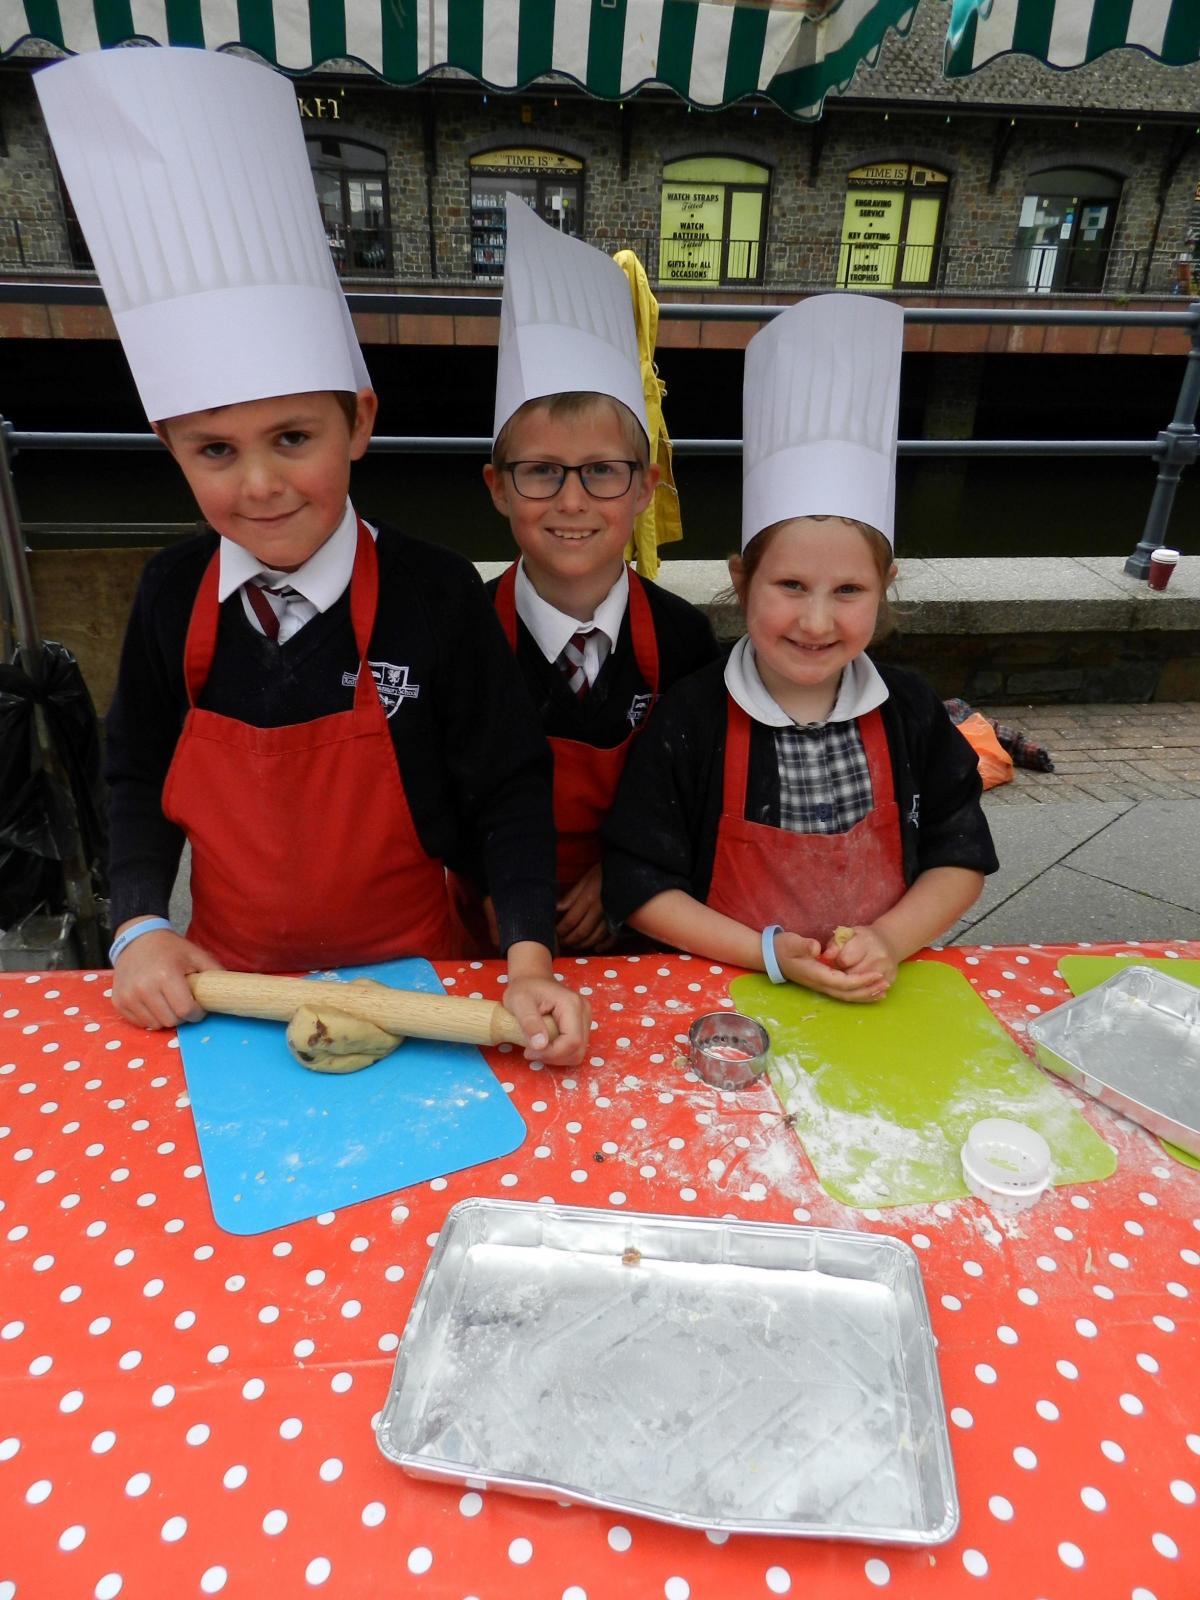 Youngsters from Years 3 and 4 at Redhill School were selling eggs from Fenton Farm in decorated boxes, and making Welsh cakes on site.
